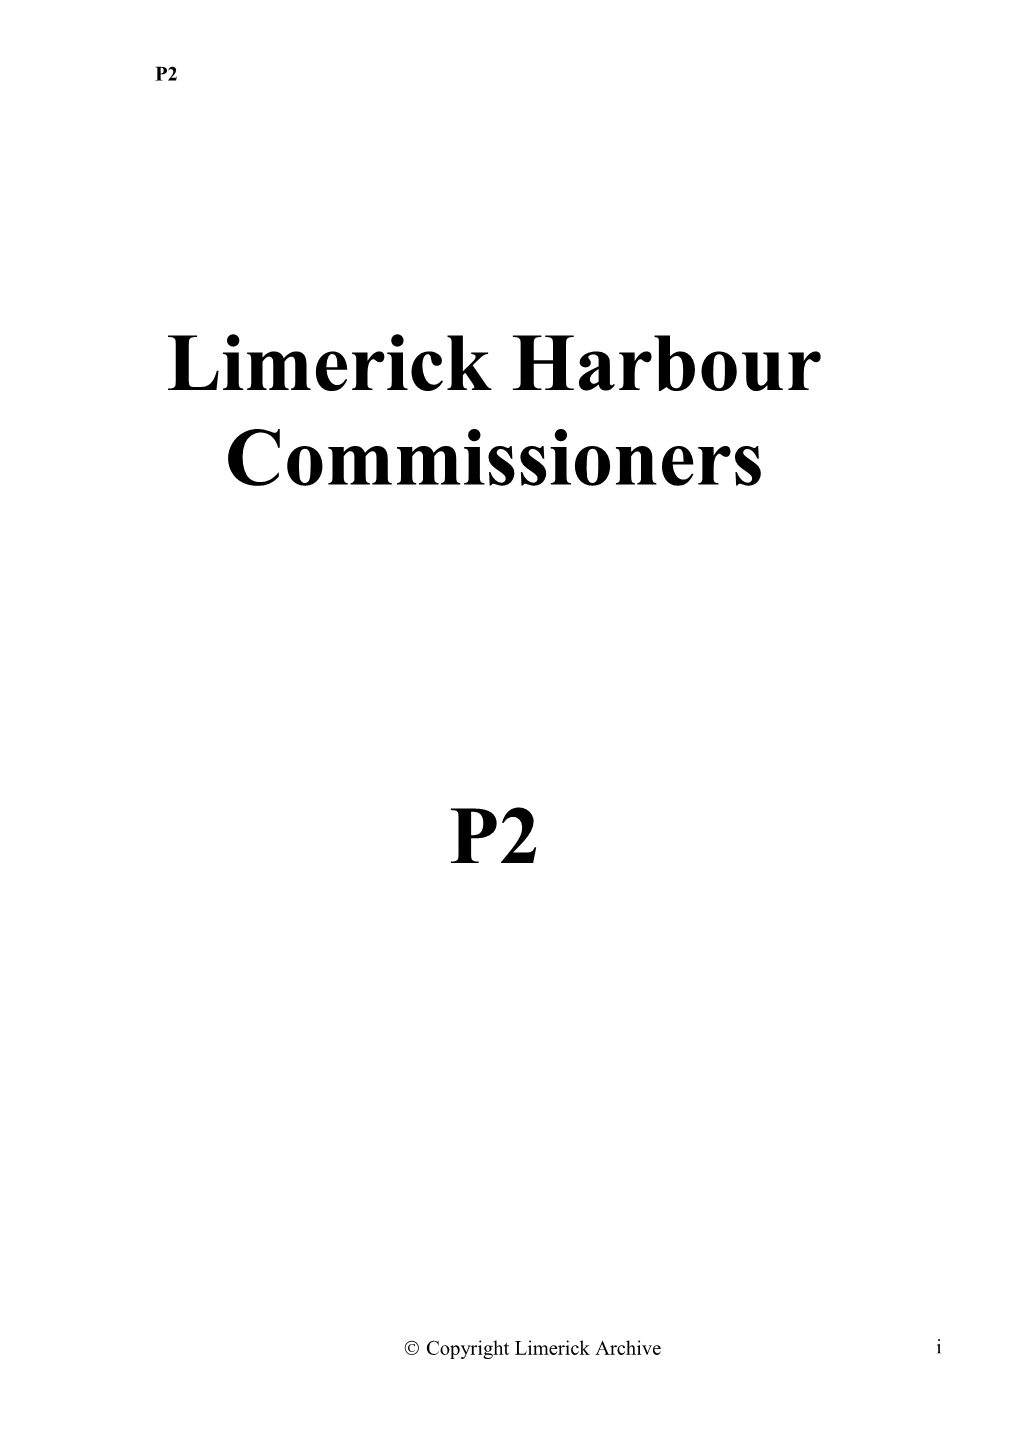 I Boards and Committees of Limerick Bridge and Harbour Commissioner